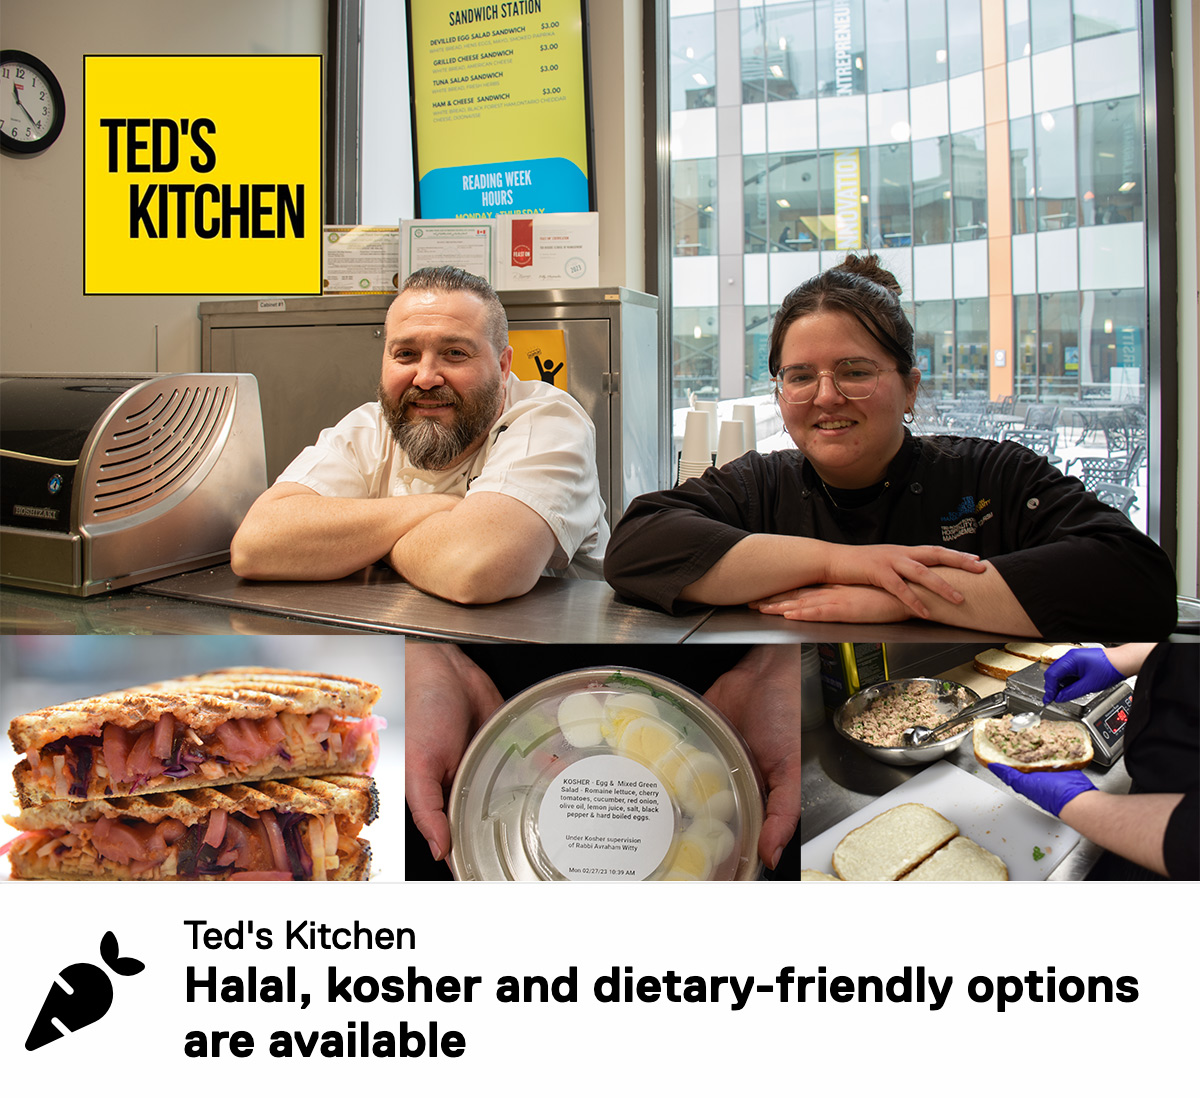 Article about Inclusive dining at Ted's Kitchen